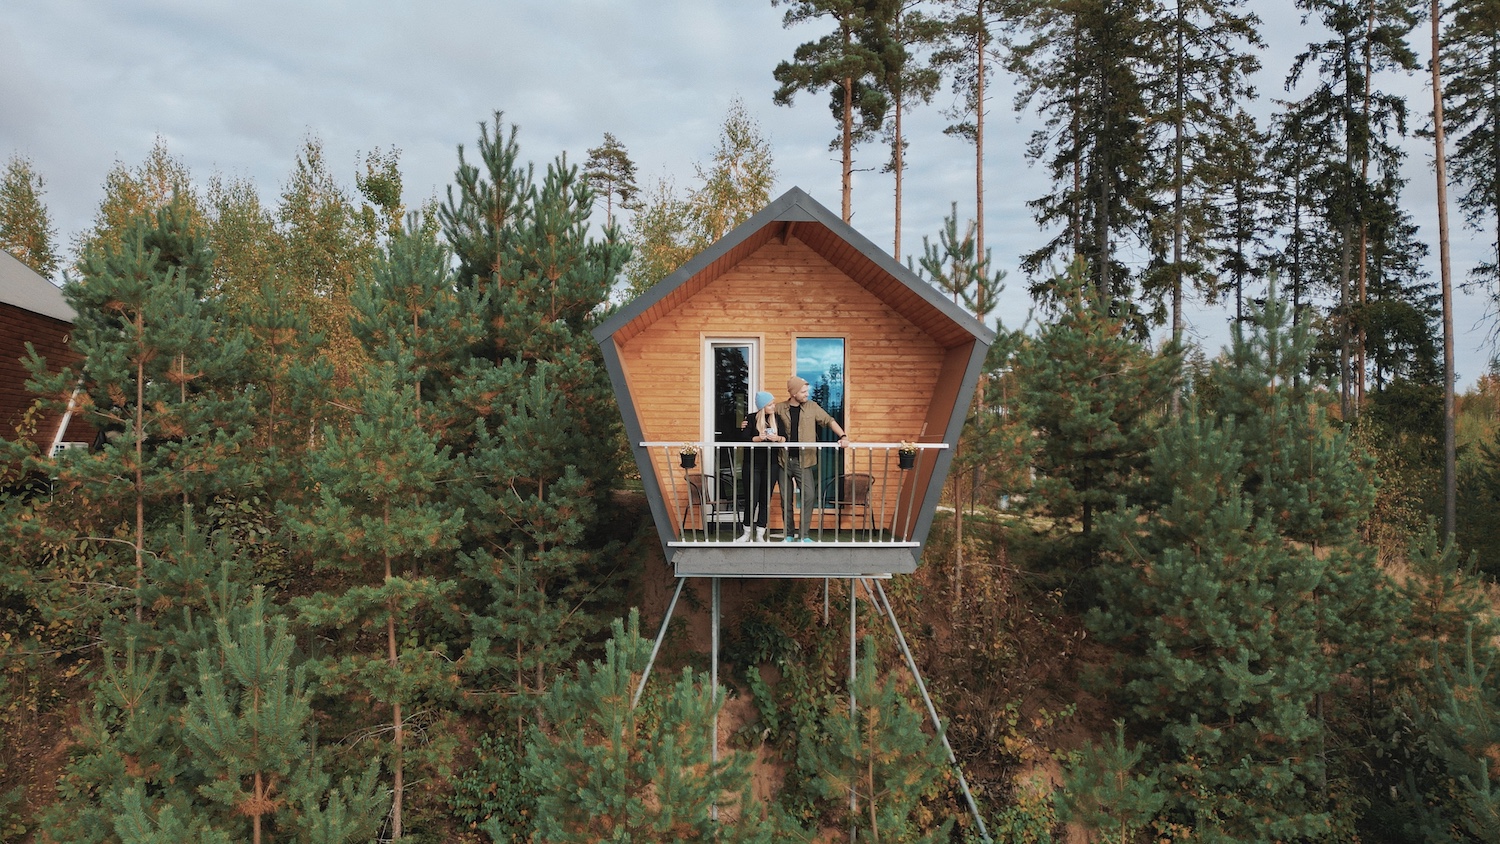 Metsjärve holiday center and the perfect weekend in Põlva county